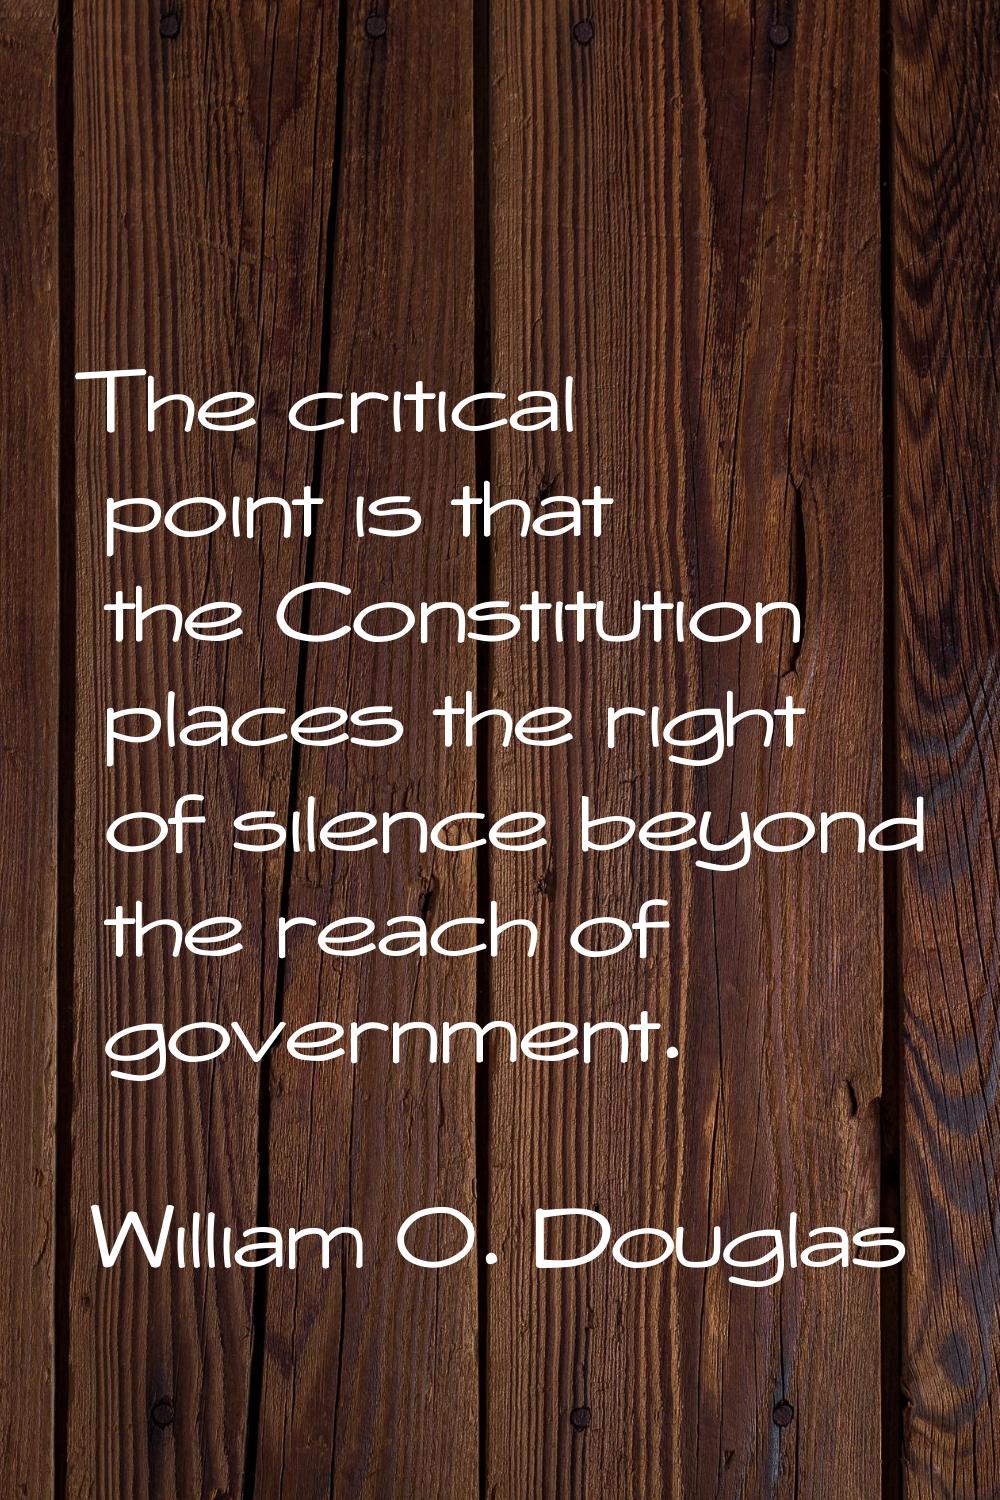 The critical point is that the Constitution places the right of silence beyond the reach of governm